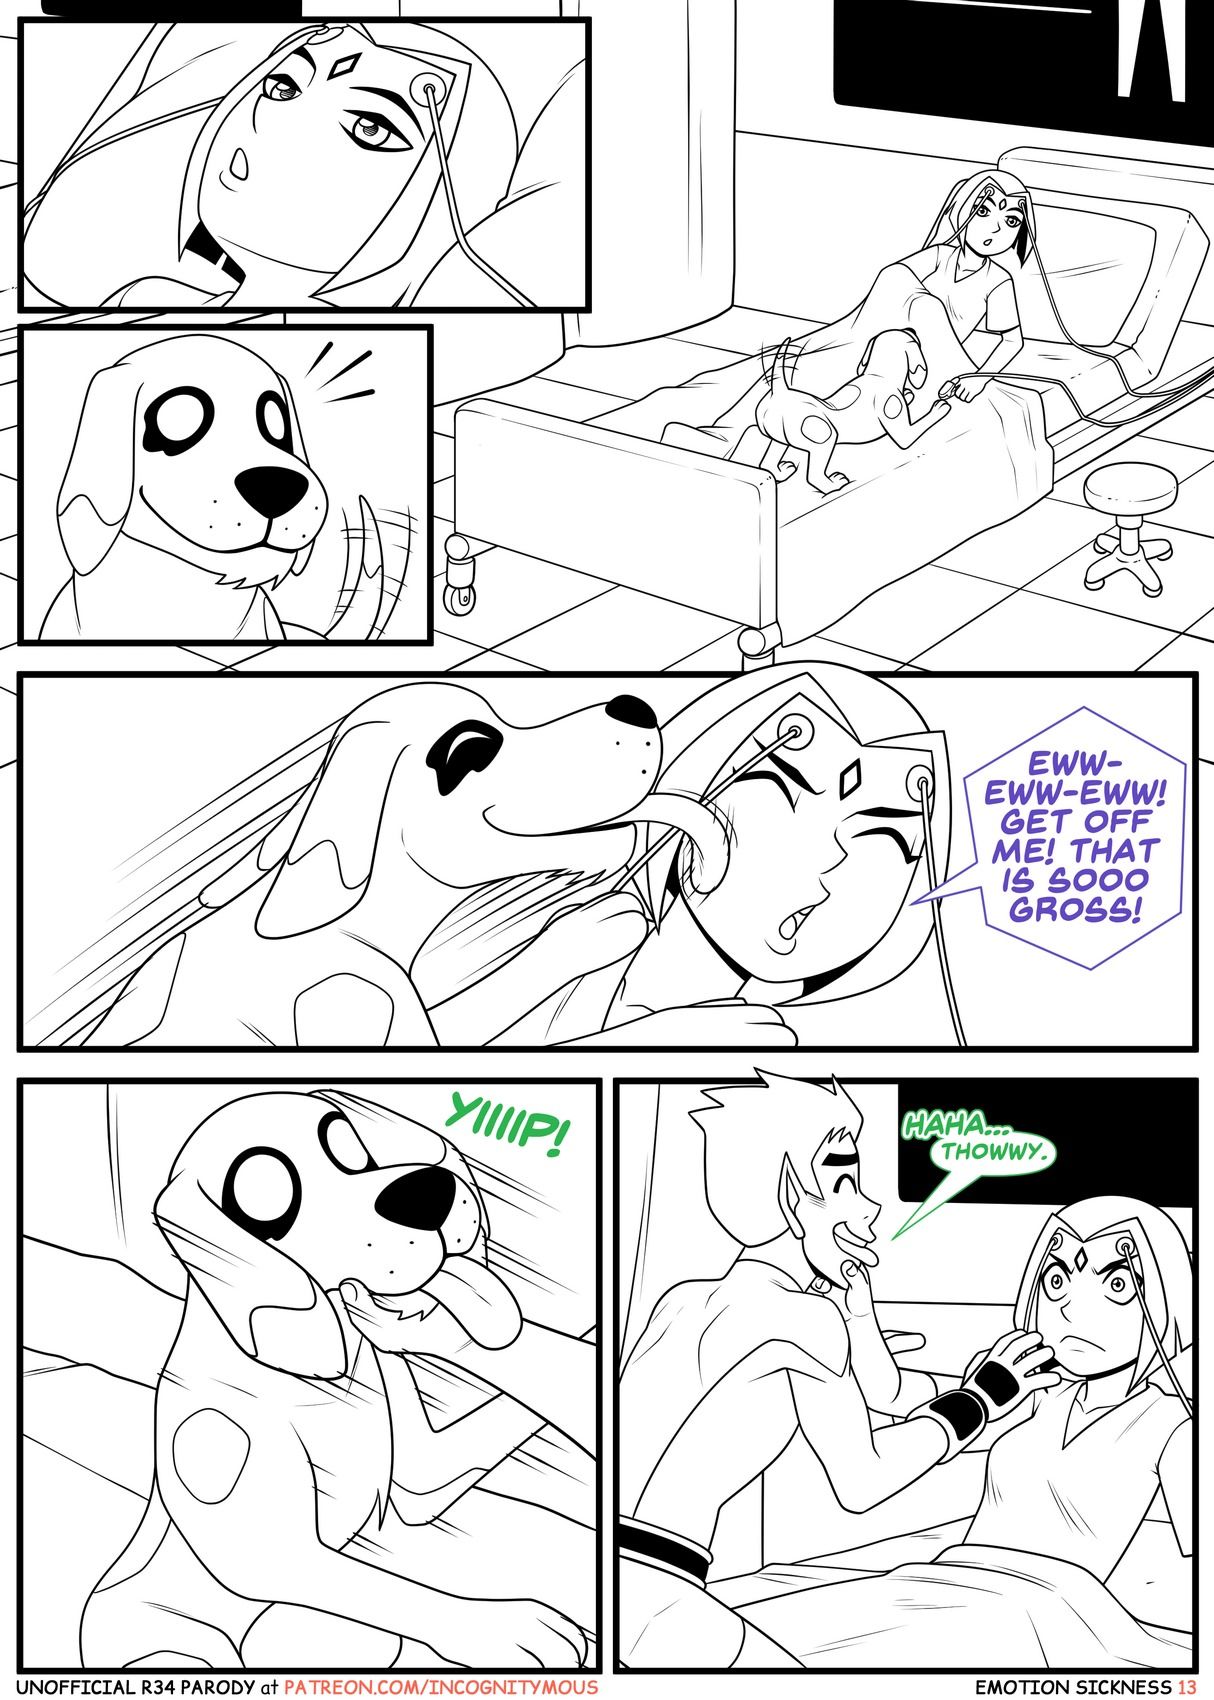 Teen Titans - Emotion Sickness (Incognitymous) page 26